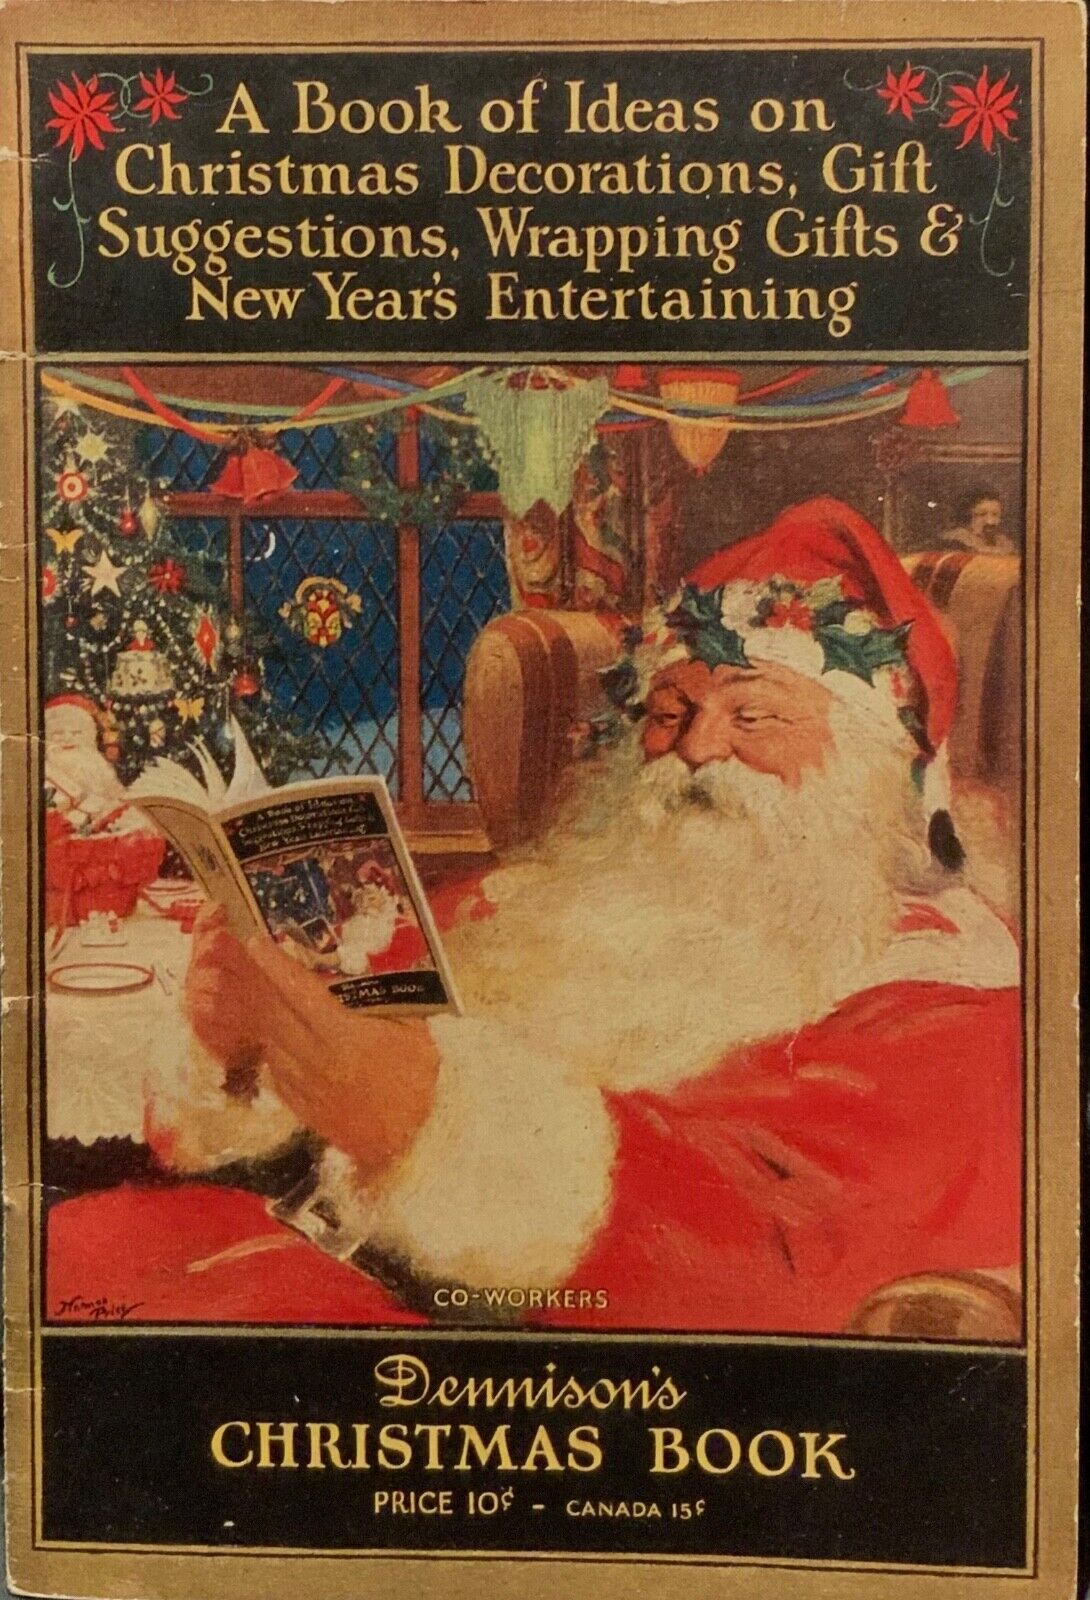 VINTAGE 1926 DENNISON’S SOFTCOVER CHRISTMAS BOOK - IDEAS ON DECORATIONS, GIFTS